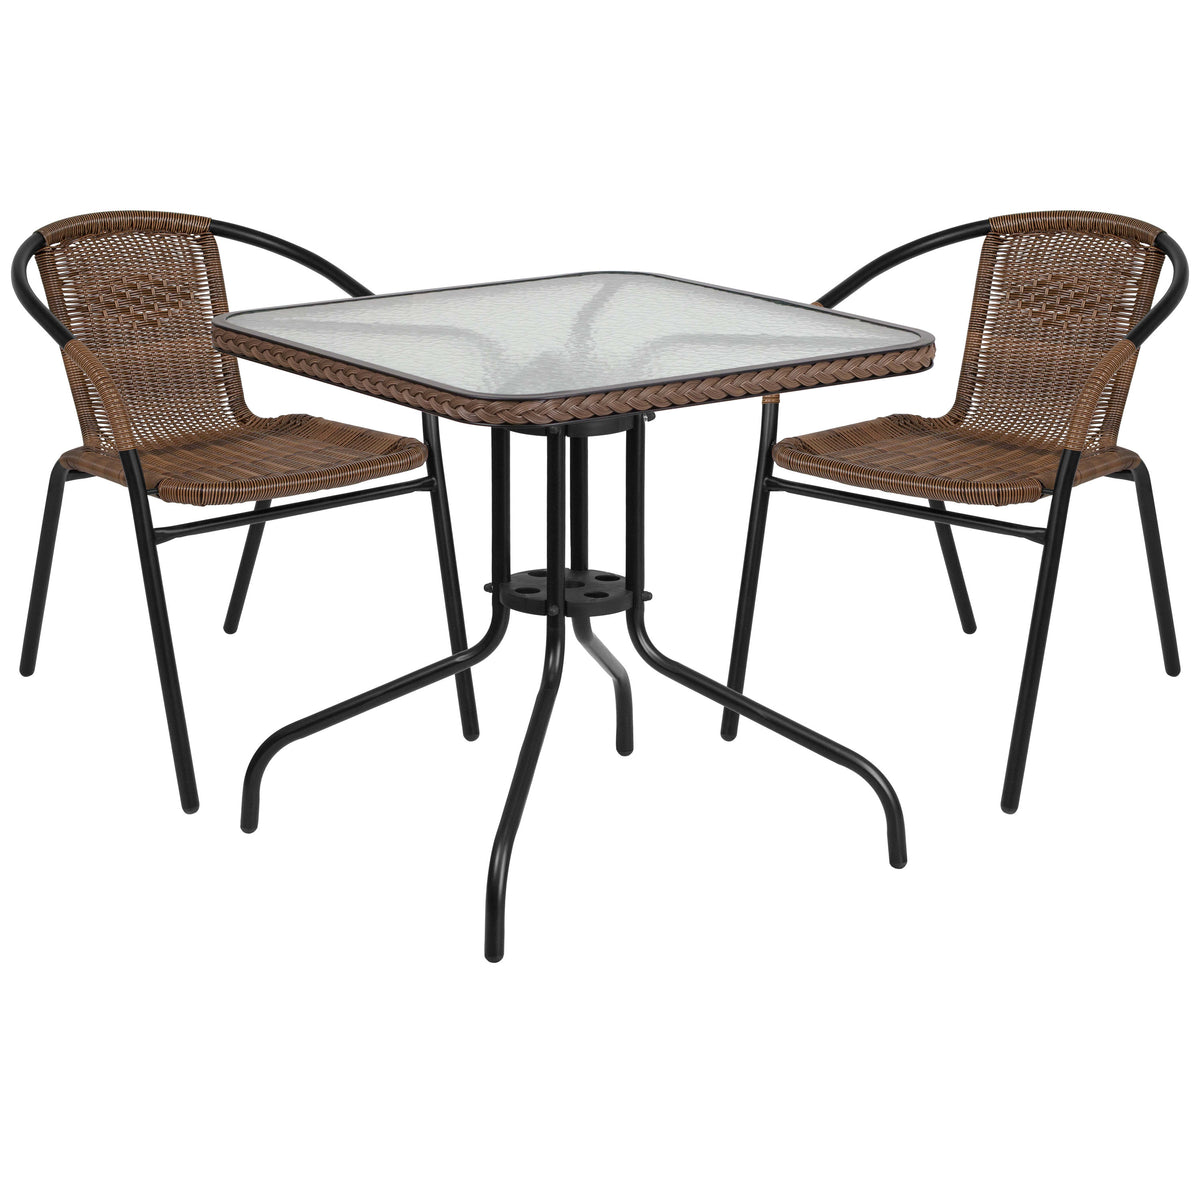 Clear/Dark Brown |#| 28inch SQ Glass Metal Table with Dk Brown Rattan Edging & 2 Dk Brown Rattan Chairs